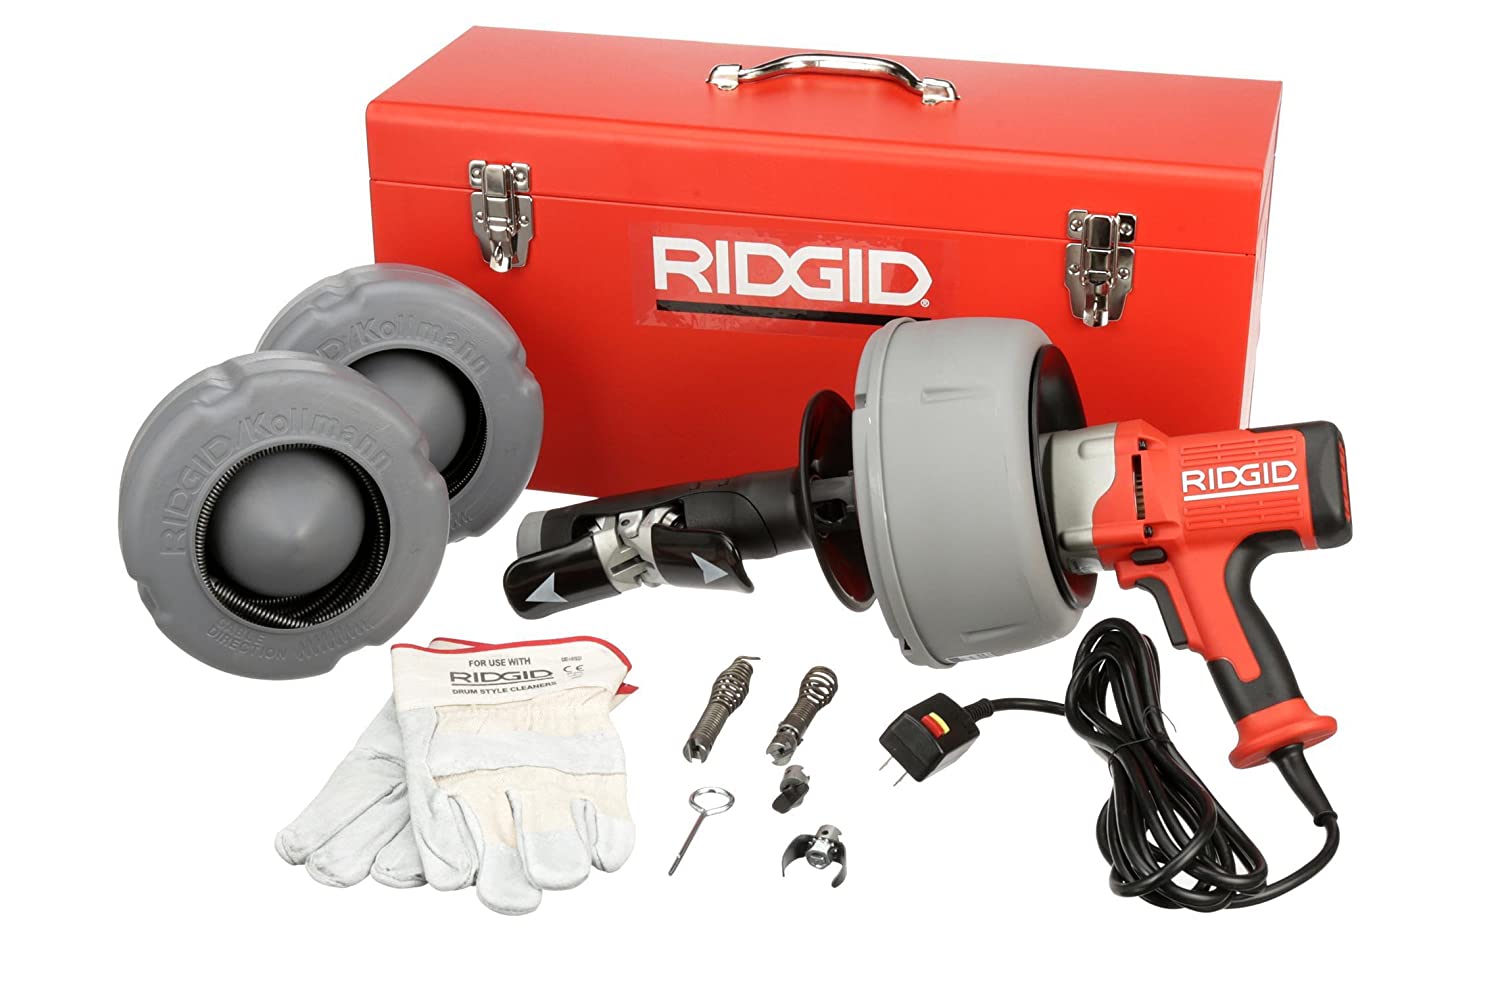 RIDGID K-45AF-5 Drain Cleaning Autofeed Snake Auger Machine with C